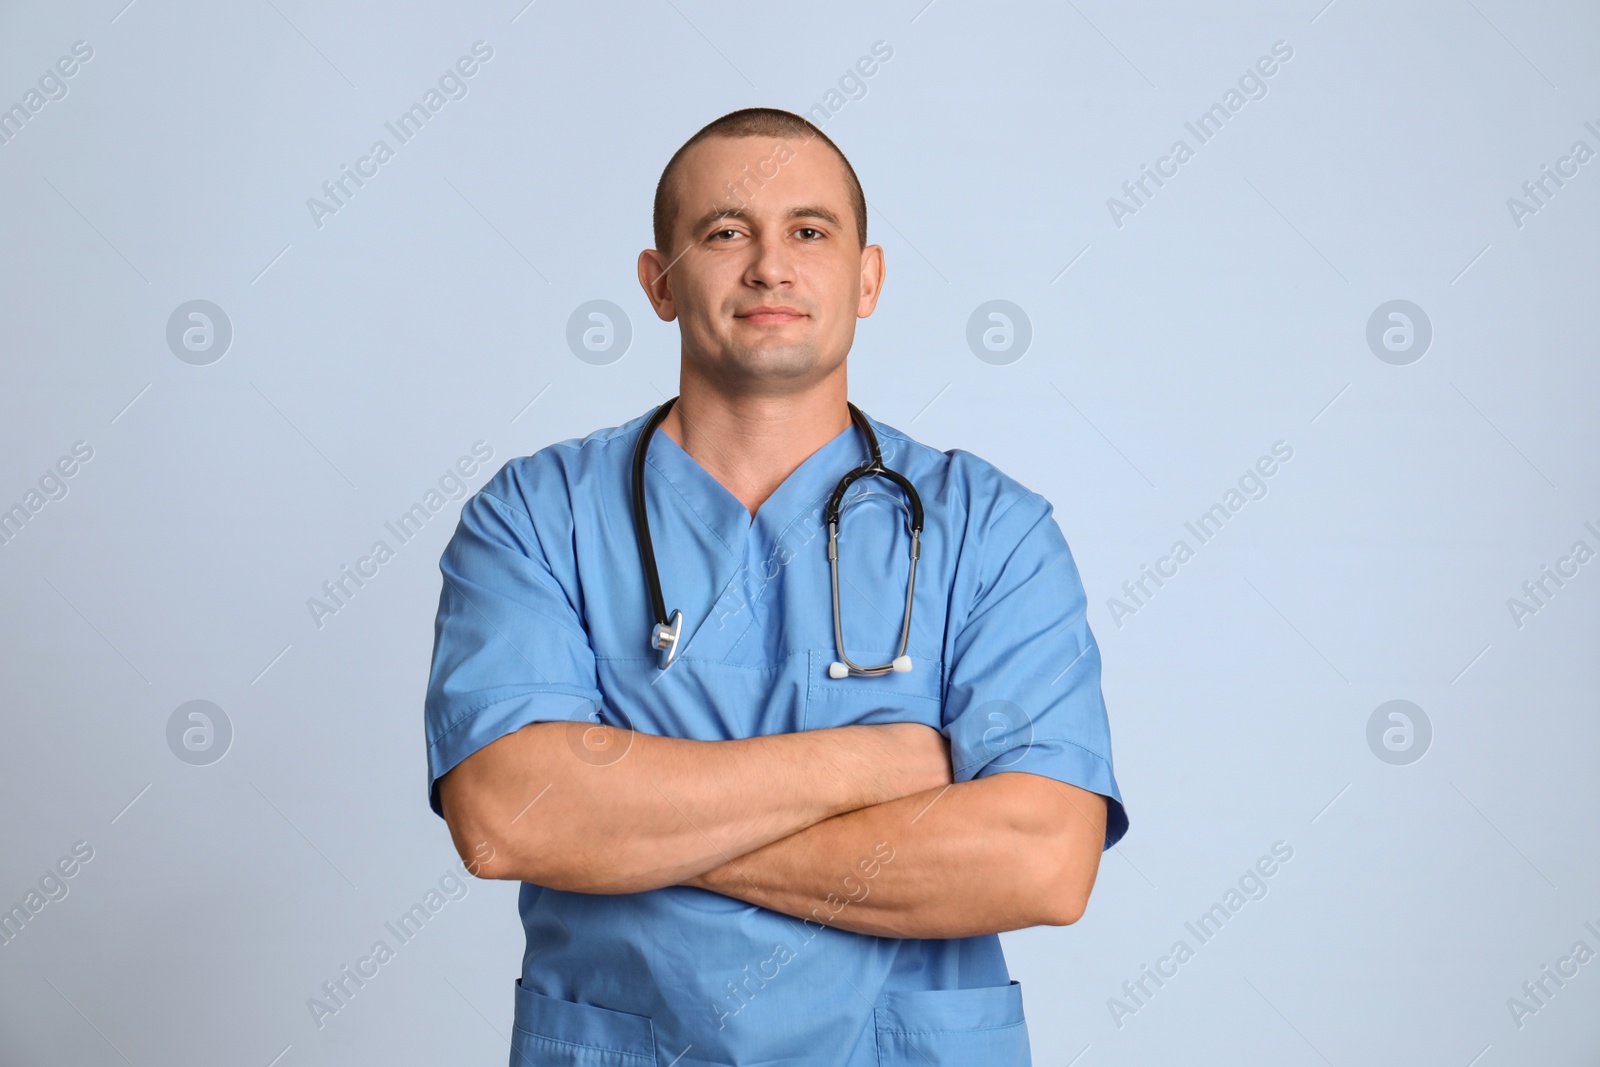 Photo of Portrait of medical assistant with stethoscope on color background